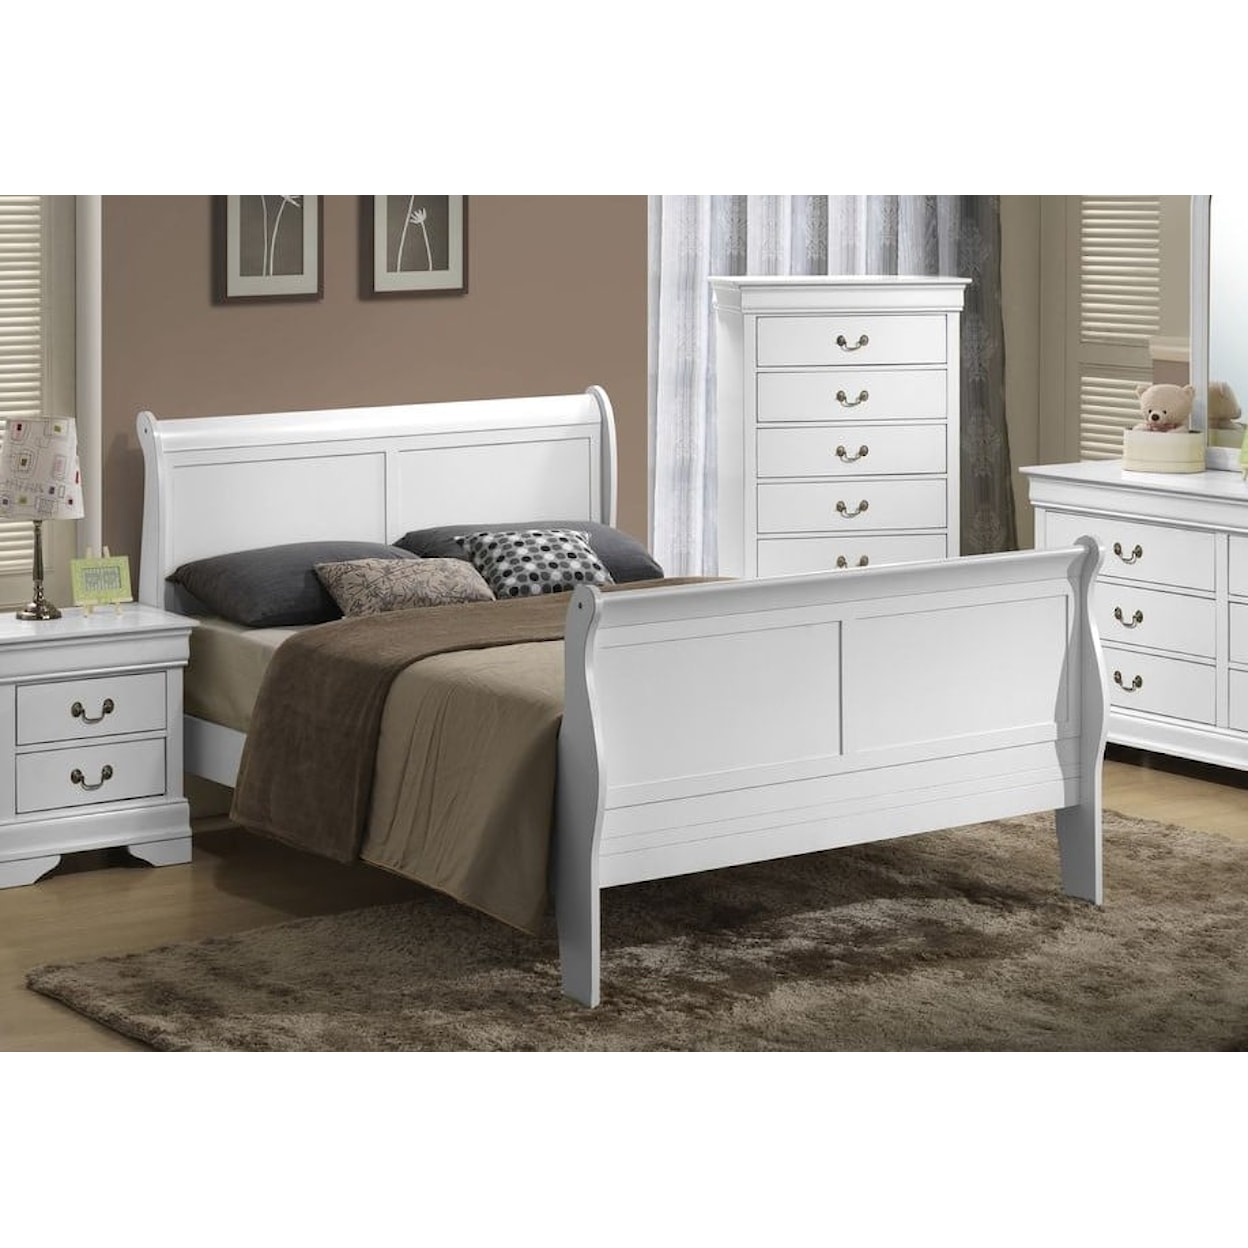 Lifestyle C4936A 5 Piece Full Bedroom Set with Chest